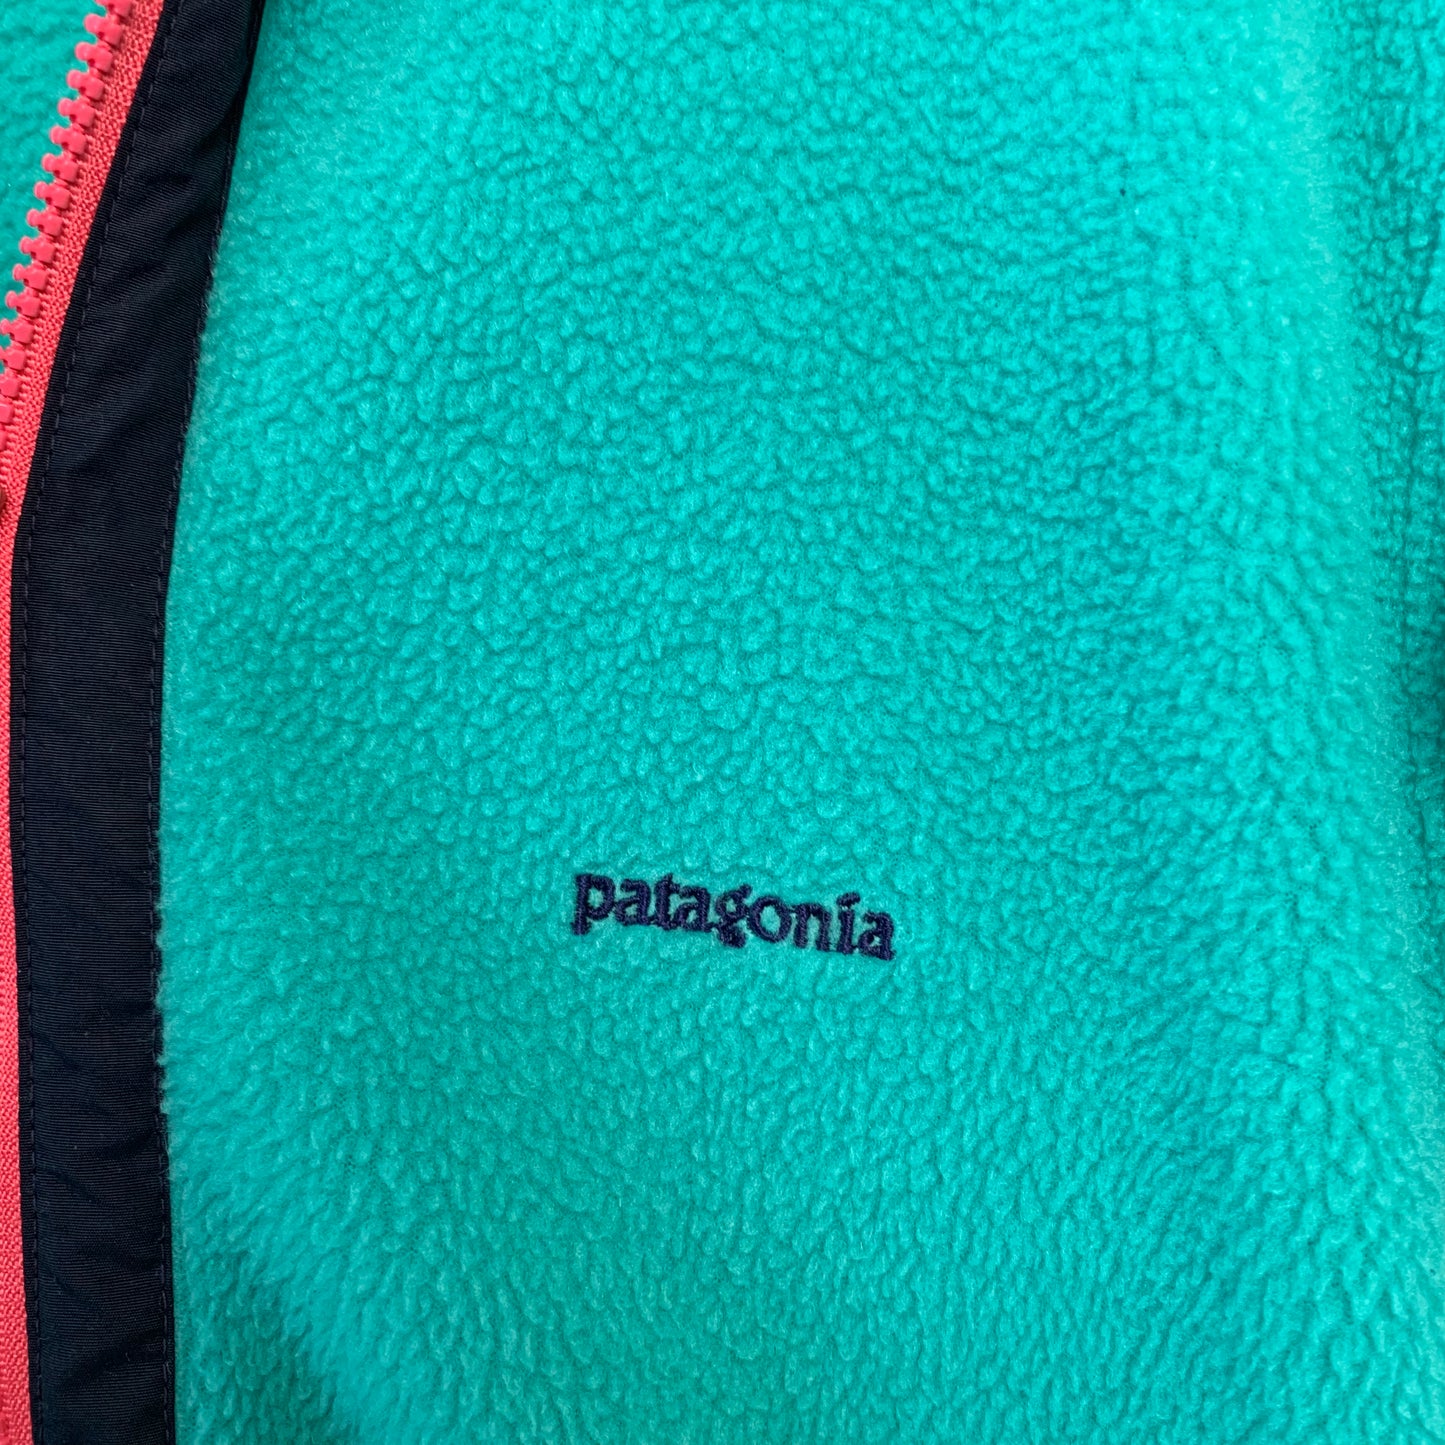 Vintage 80s Patagonia Fleece Half Zip Pullover Teal and Pink Made in the USA Medium